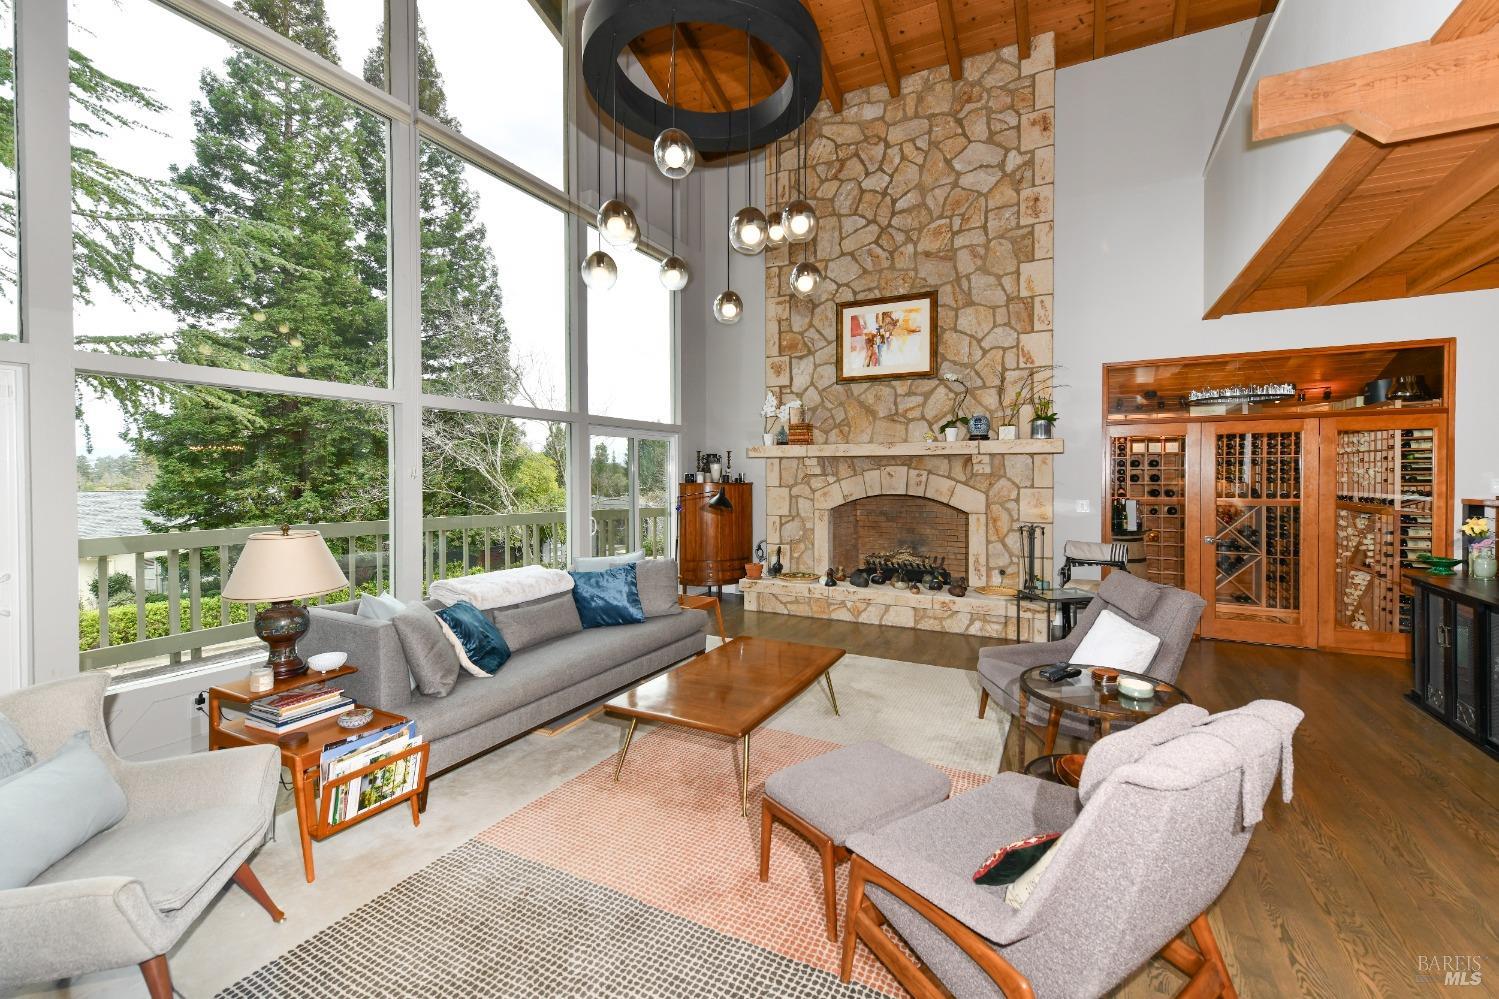 Stunning Great Room with fireplace, wine cellar, and an abundance of natural light.